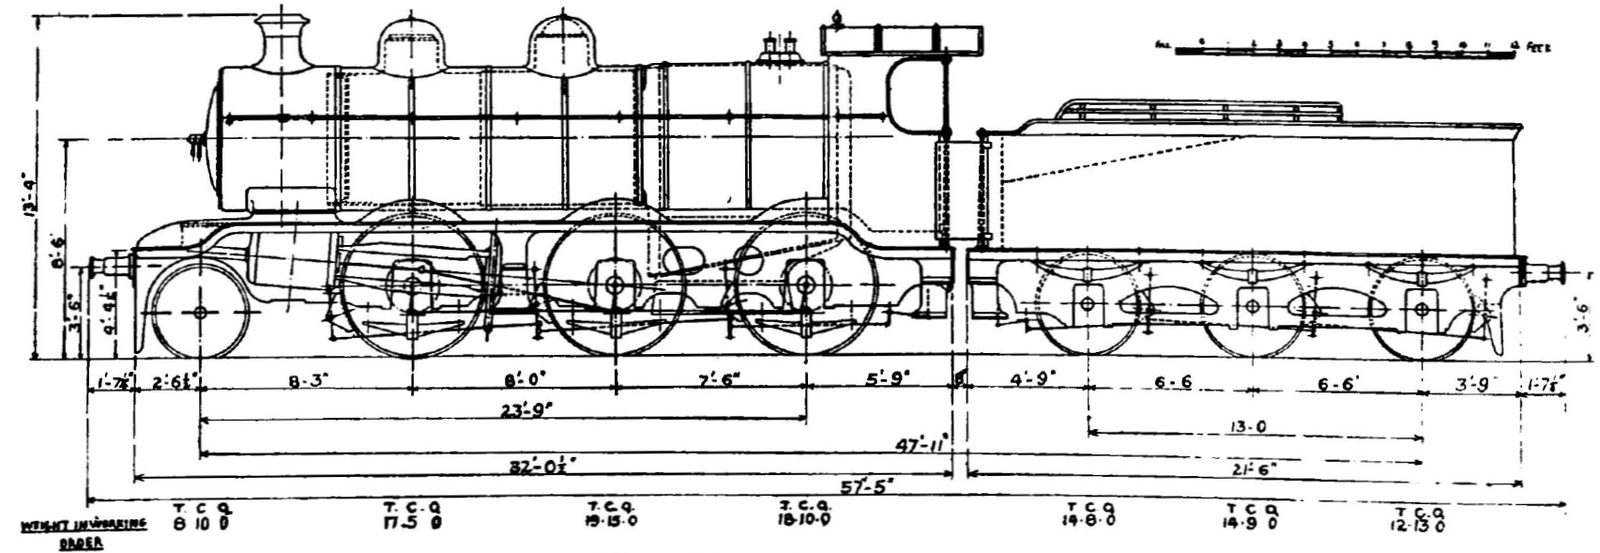 Schematic drawing after the rebuild with second steam dome